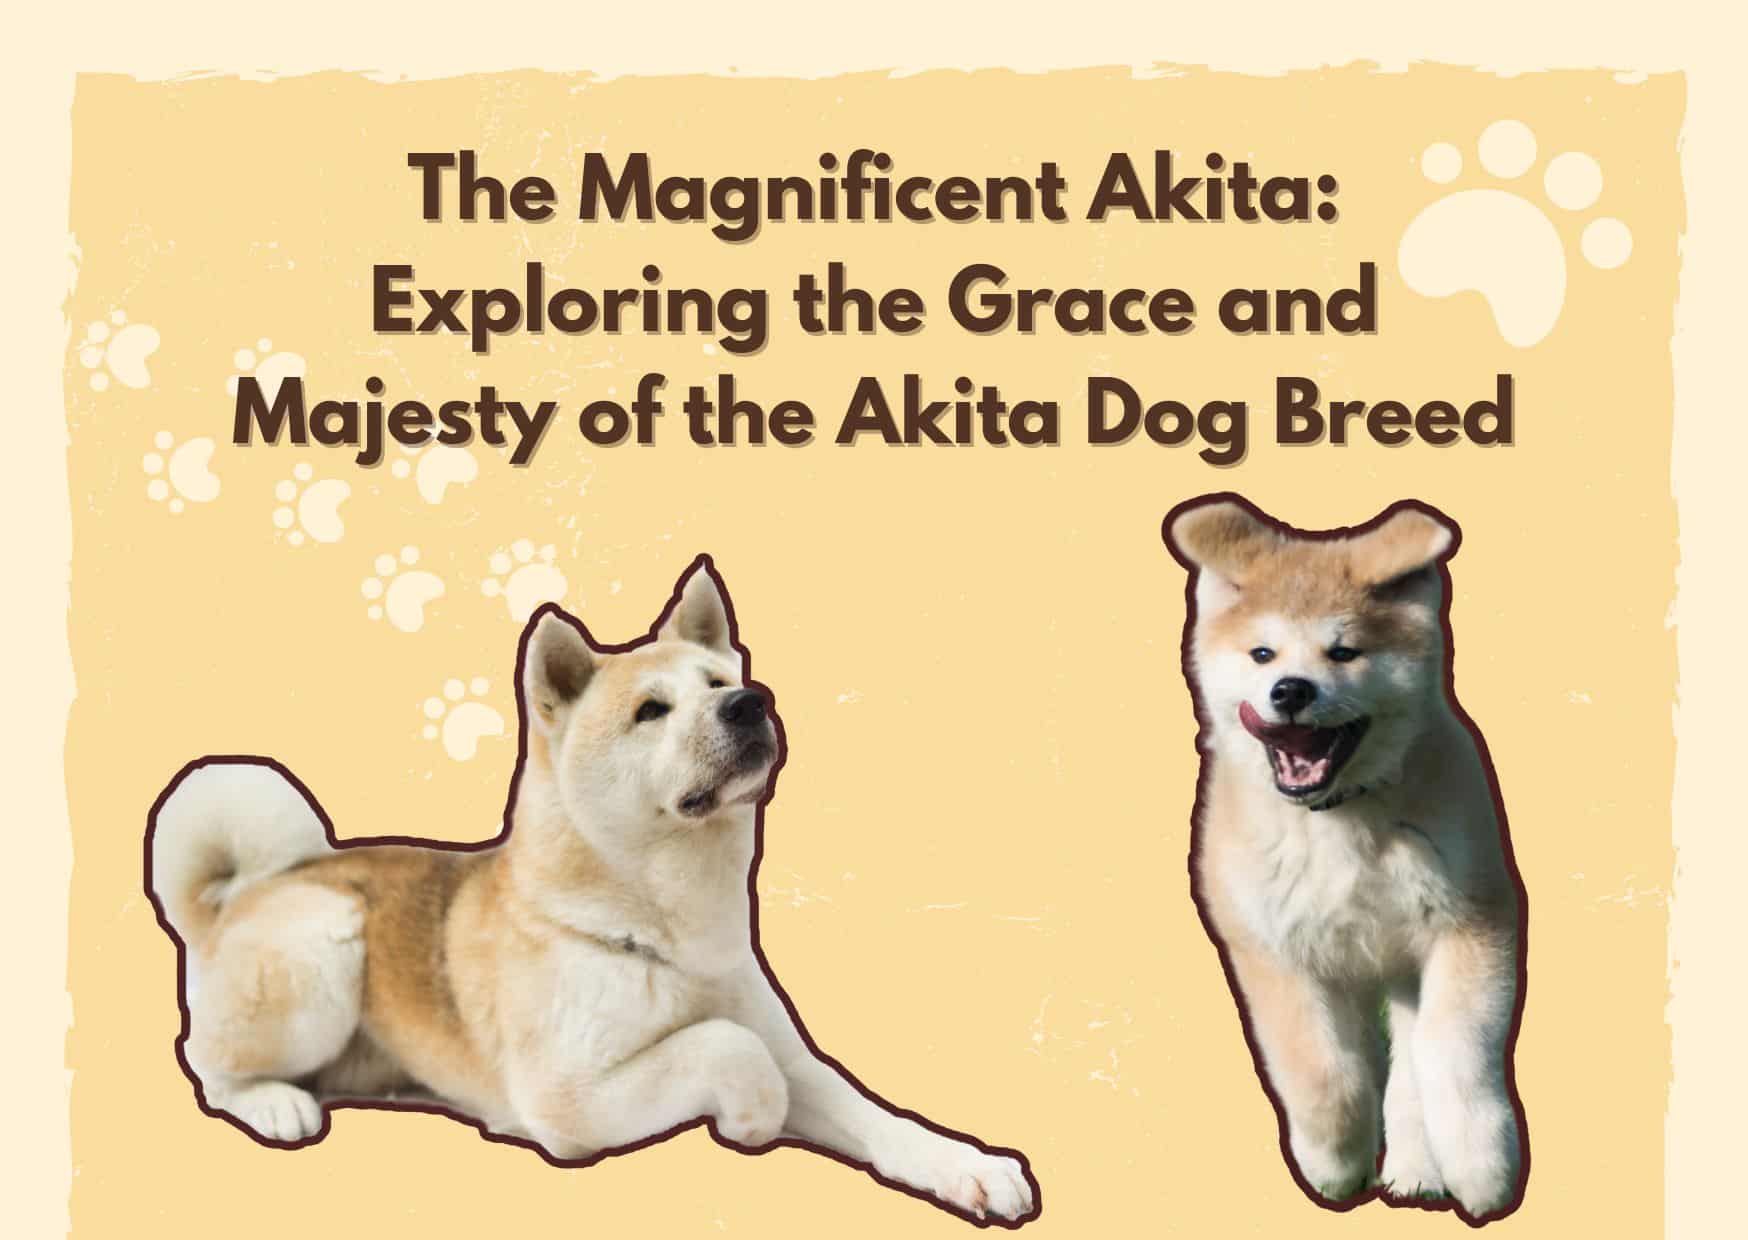 The Magnificent Akita Exploring the Grace and Majesty of the Akita Dog Breed